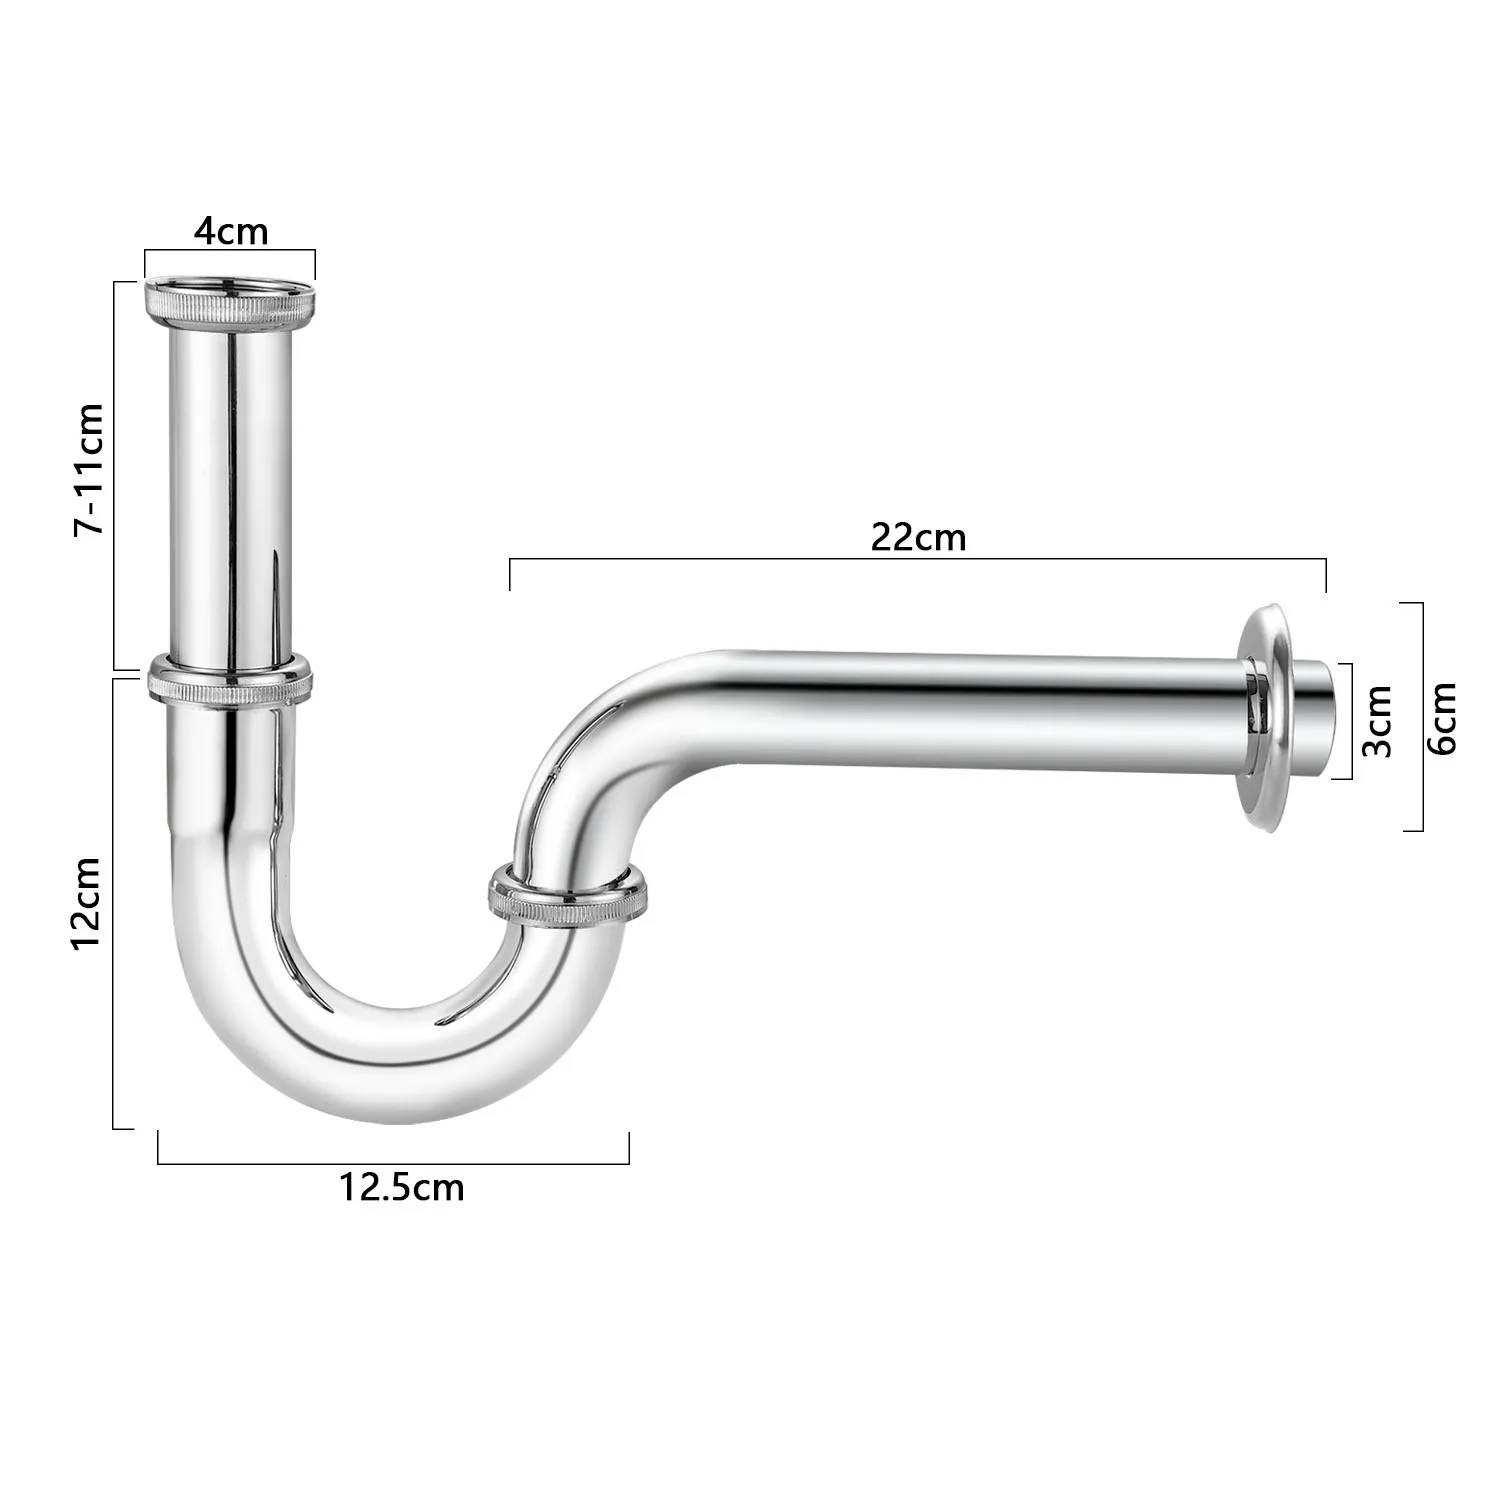 

Stainless Steel Waste Drain Valve Siphon Sink Drainer Anti-odor Water Trap Bathroom Kitchen Toliet Pipe Drainage Fixtures